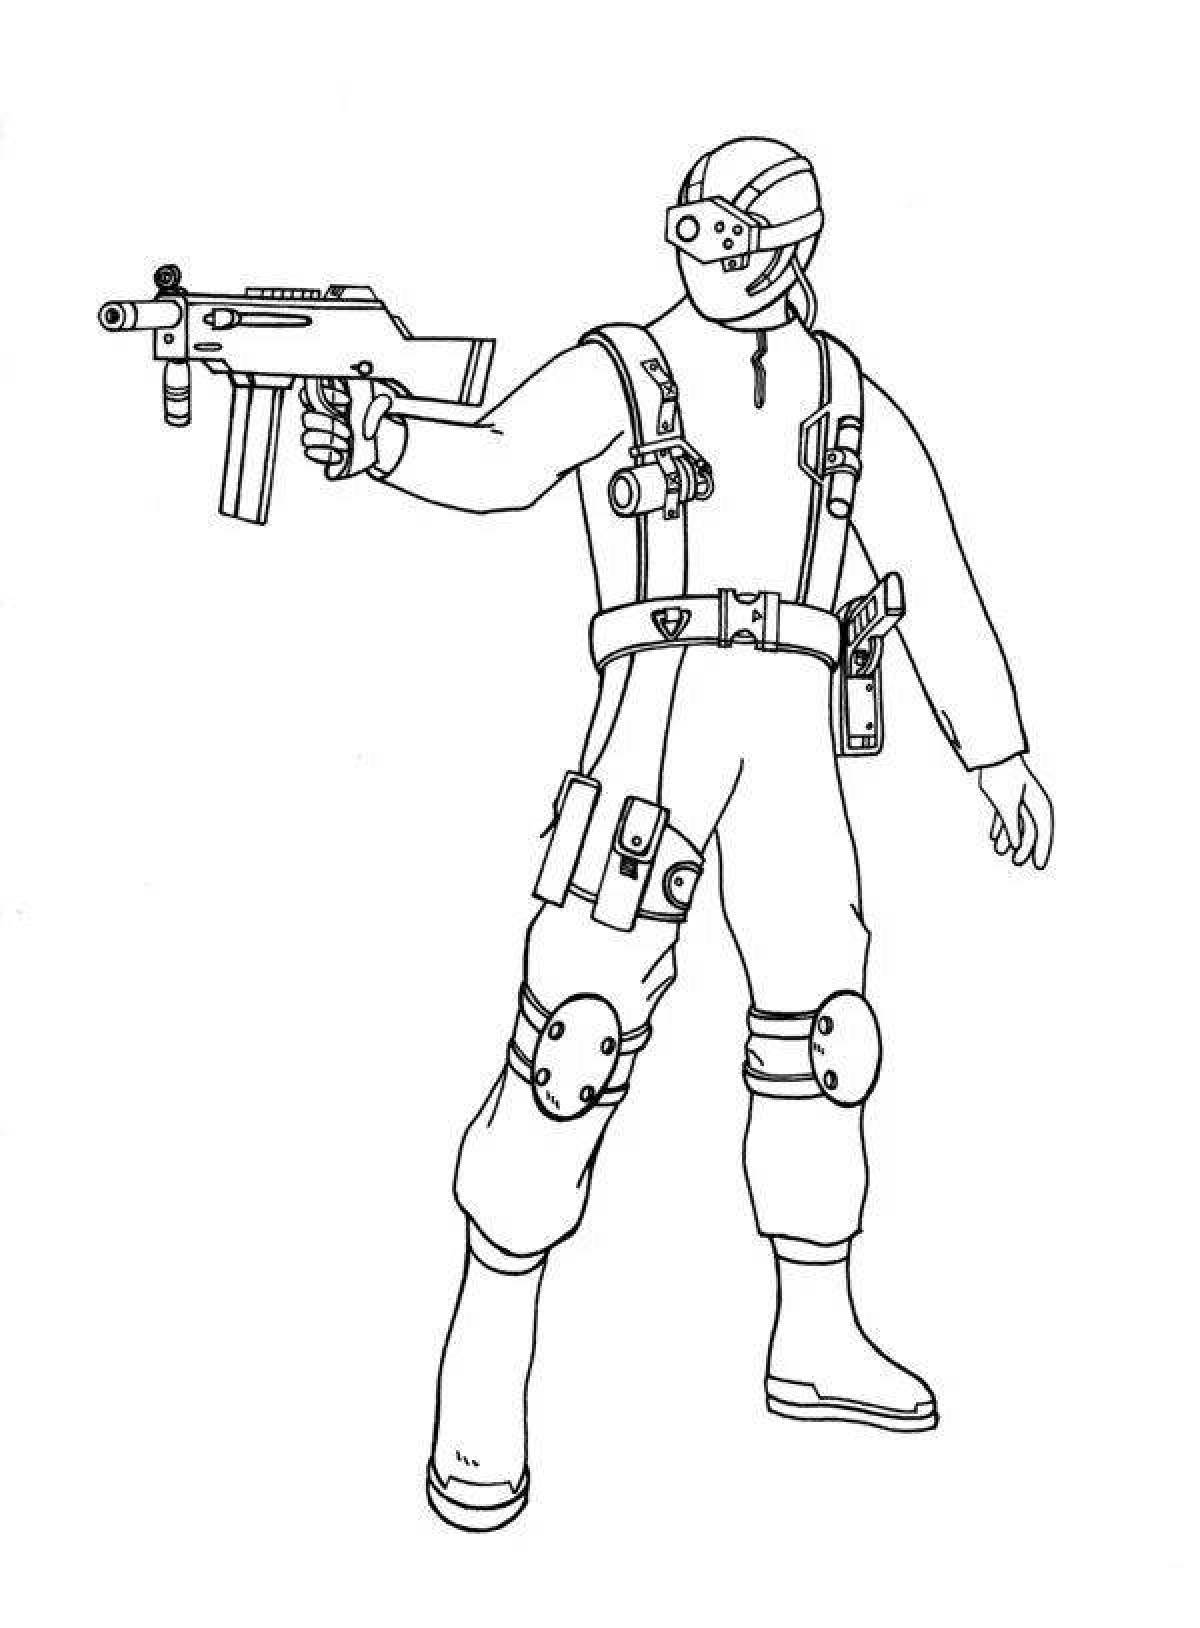 Playful call of duty coloring page